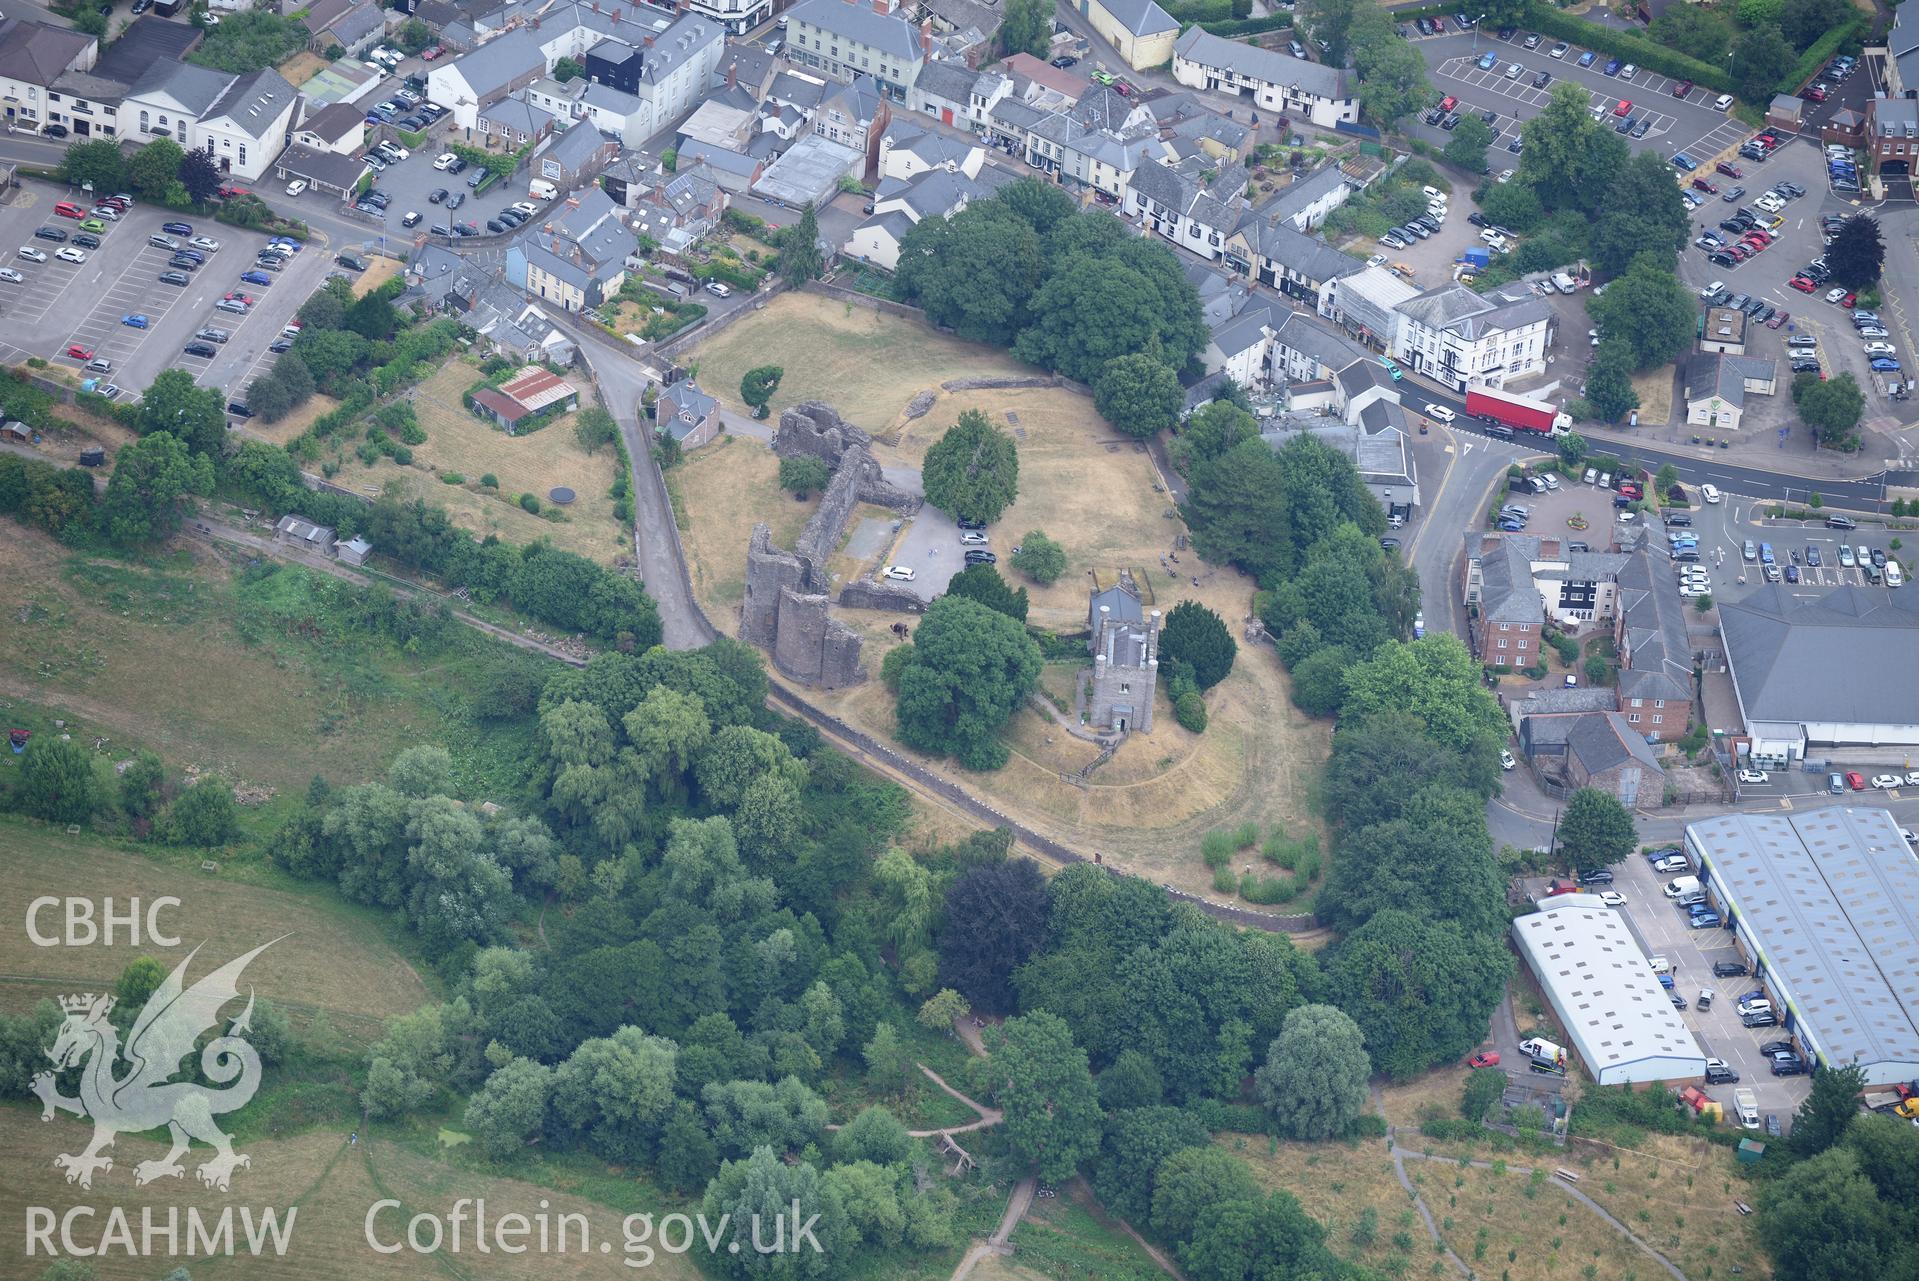 Royal Commission aerial photography of Abergavenny taken on 19th July 2018 during the 2018 drought.